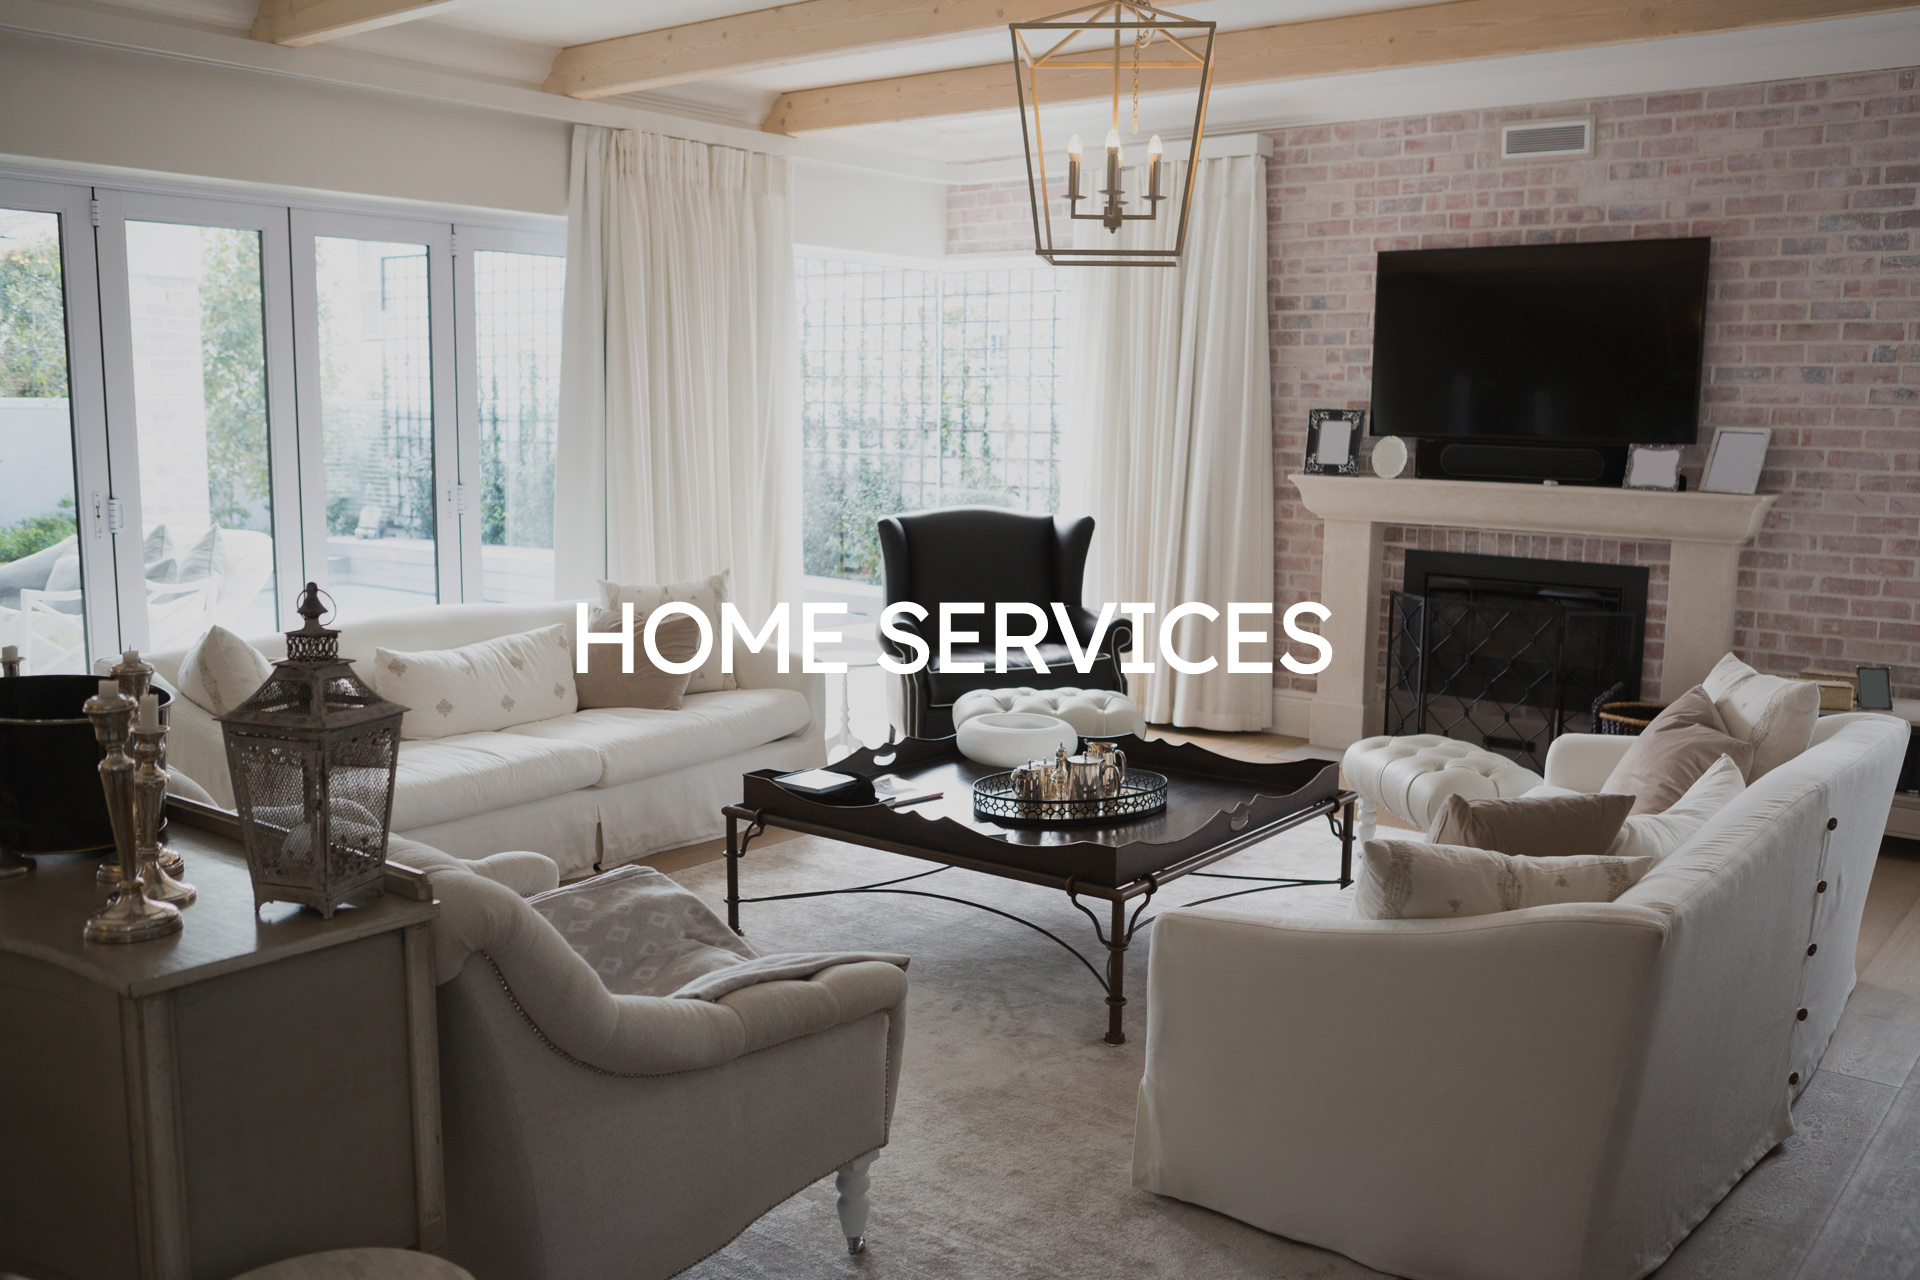 004_HOME_SERVICES-3